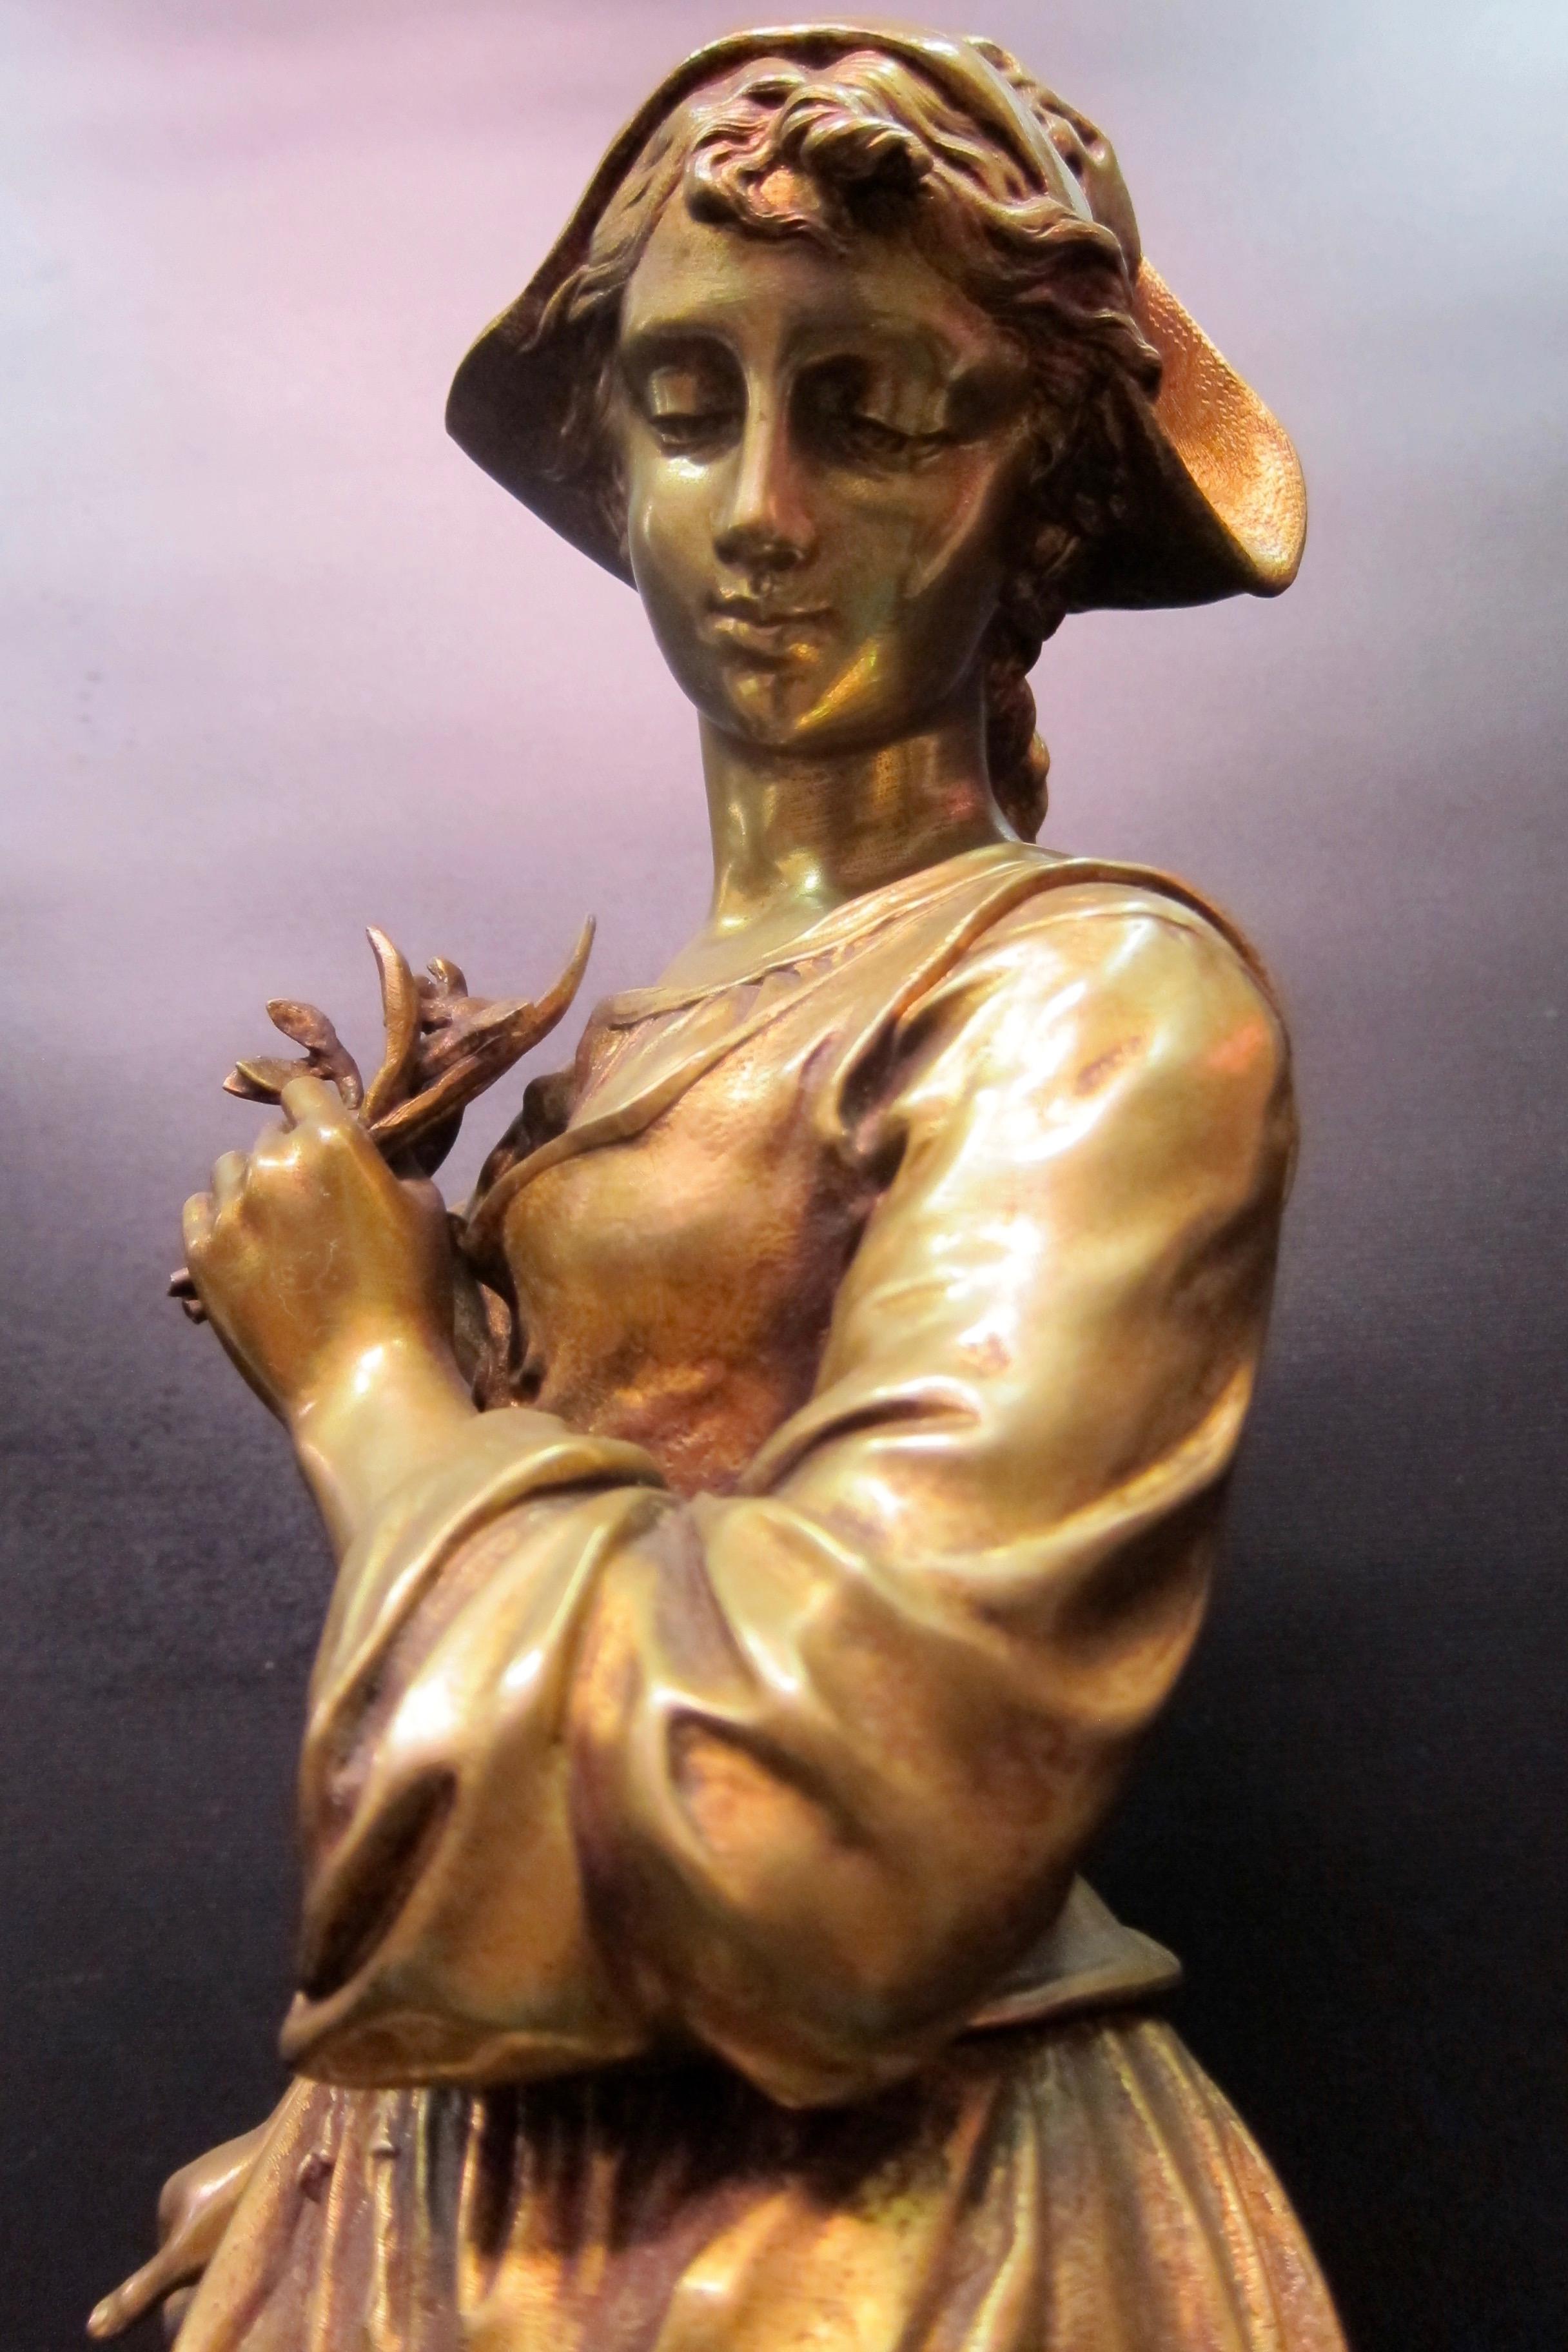 This vintage bronze sculpture off a young French maiden costumed in a flowing garment is signed by the artist, E. Tassel. She is exceptionally well detailed from head to toe. The subject casts her eyes downward as she carefully balances herself